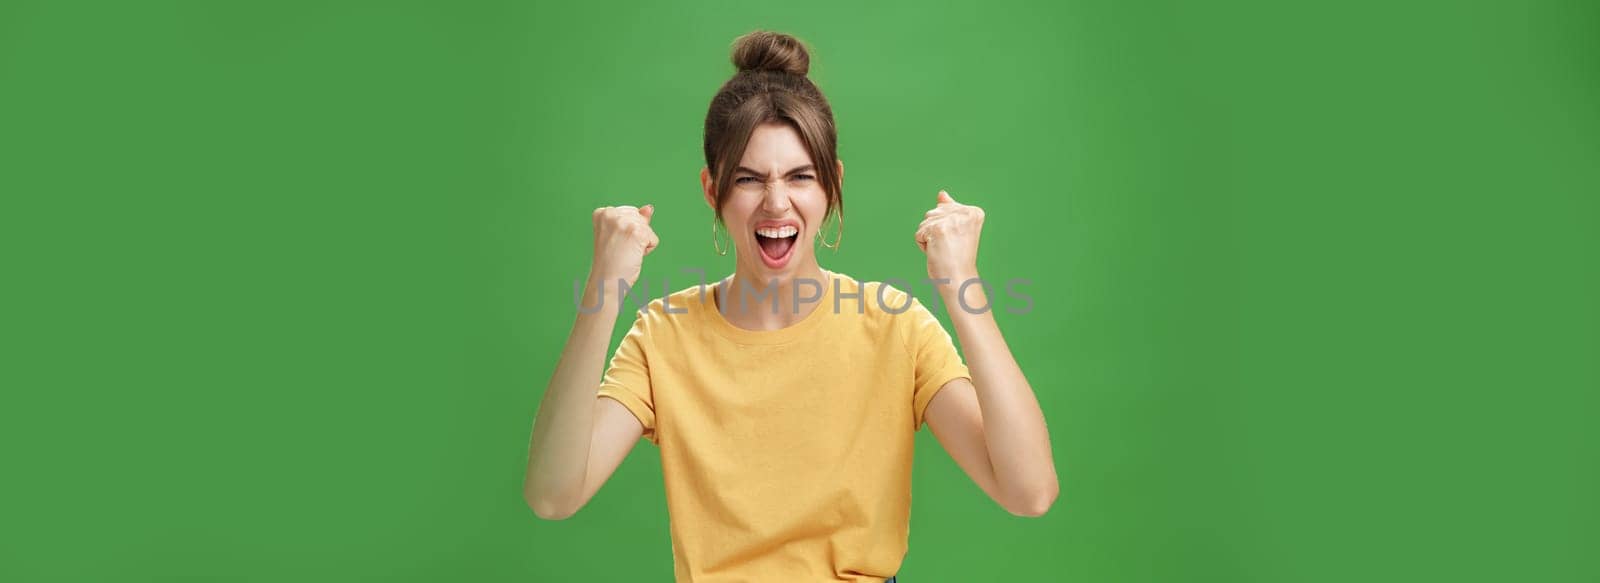 Furious and powerful good-looking emotive woman in yellow t-shirt with gapped teeth yelling in cheer being dedicated fan, supporting favorite team wanting it win raising clenched fists in victory. Copy space